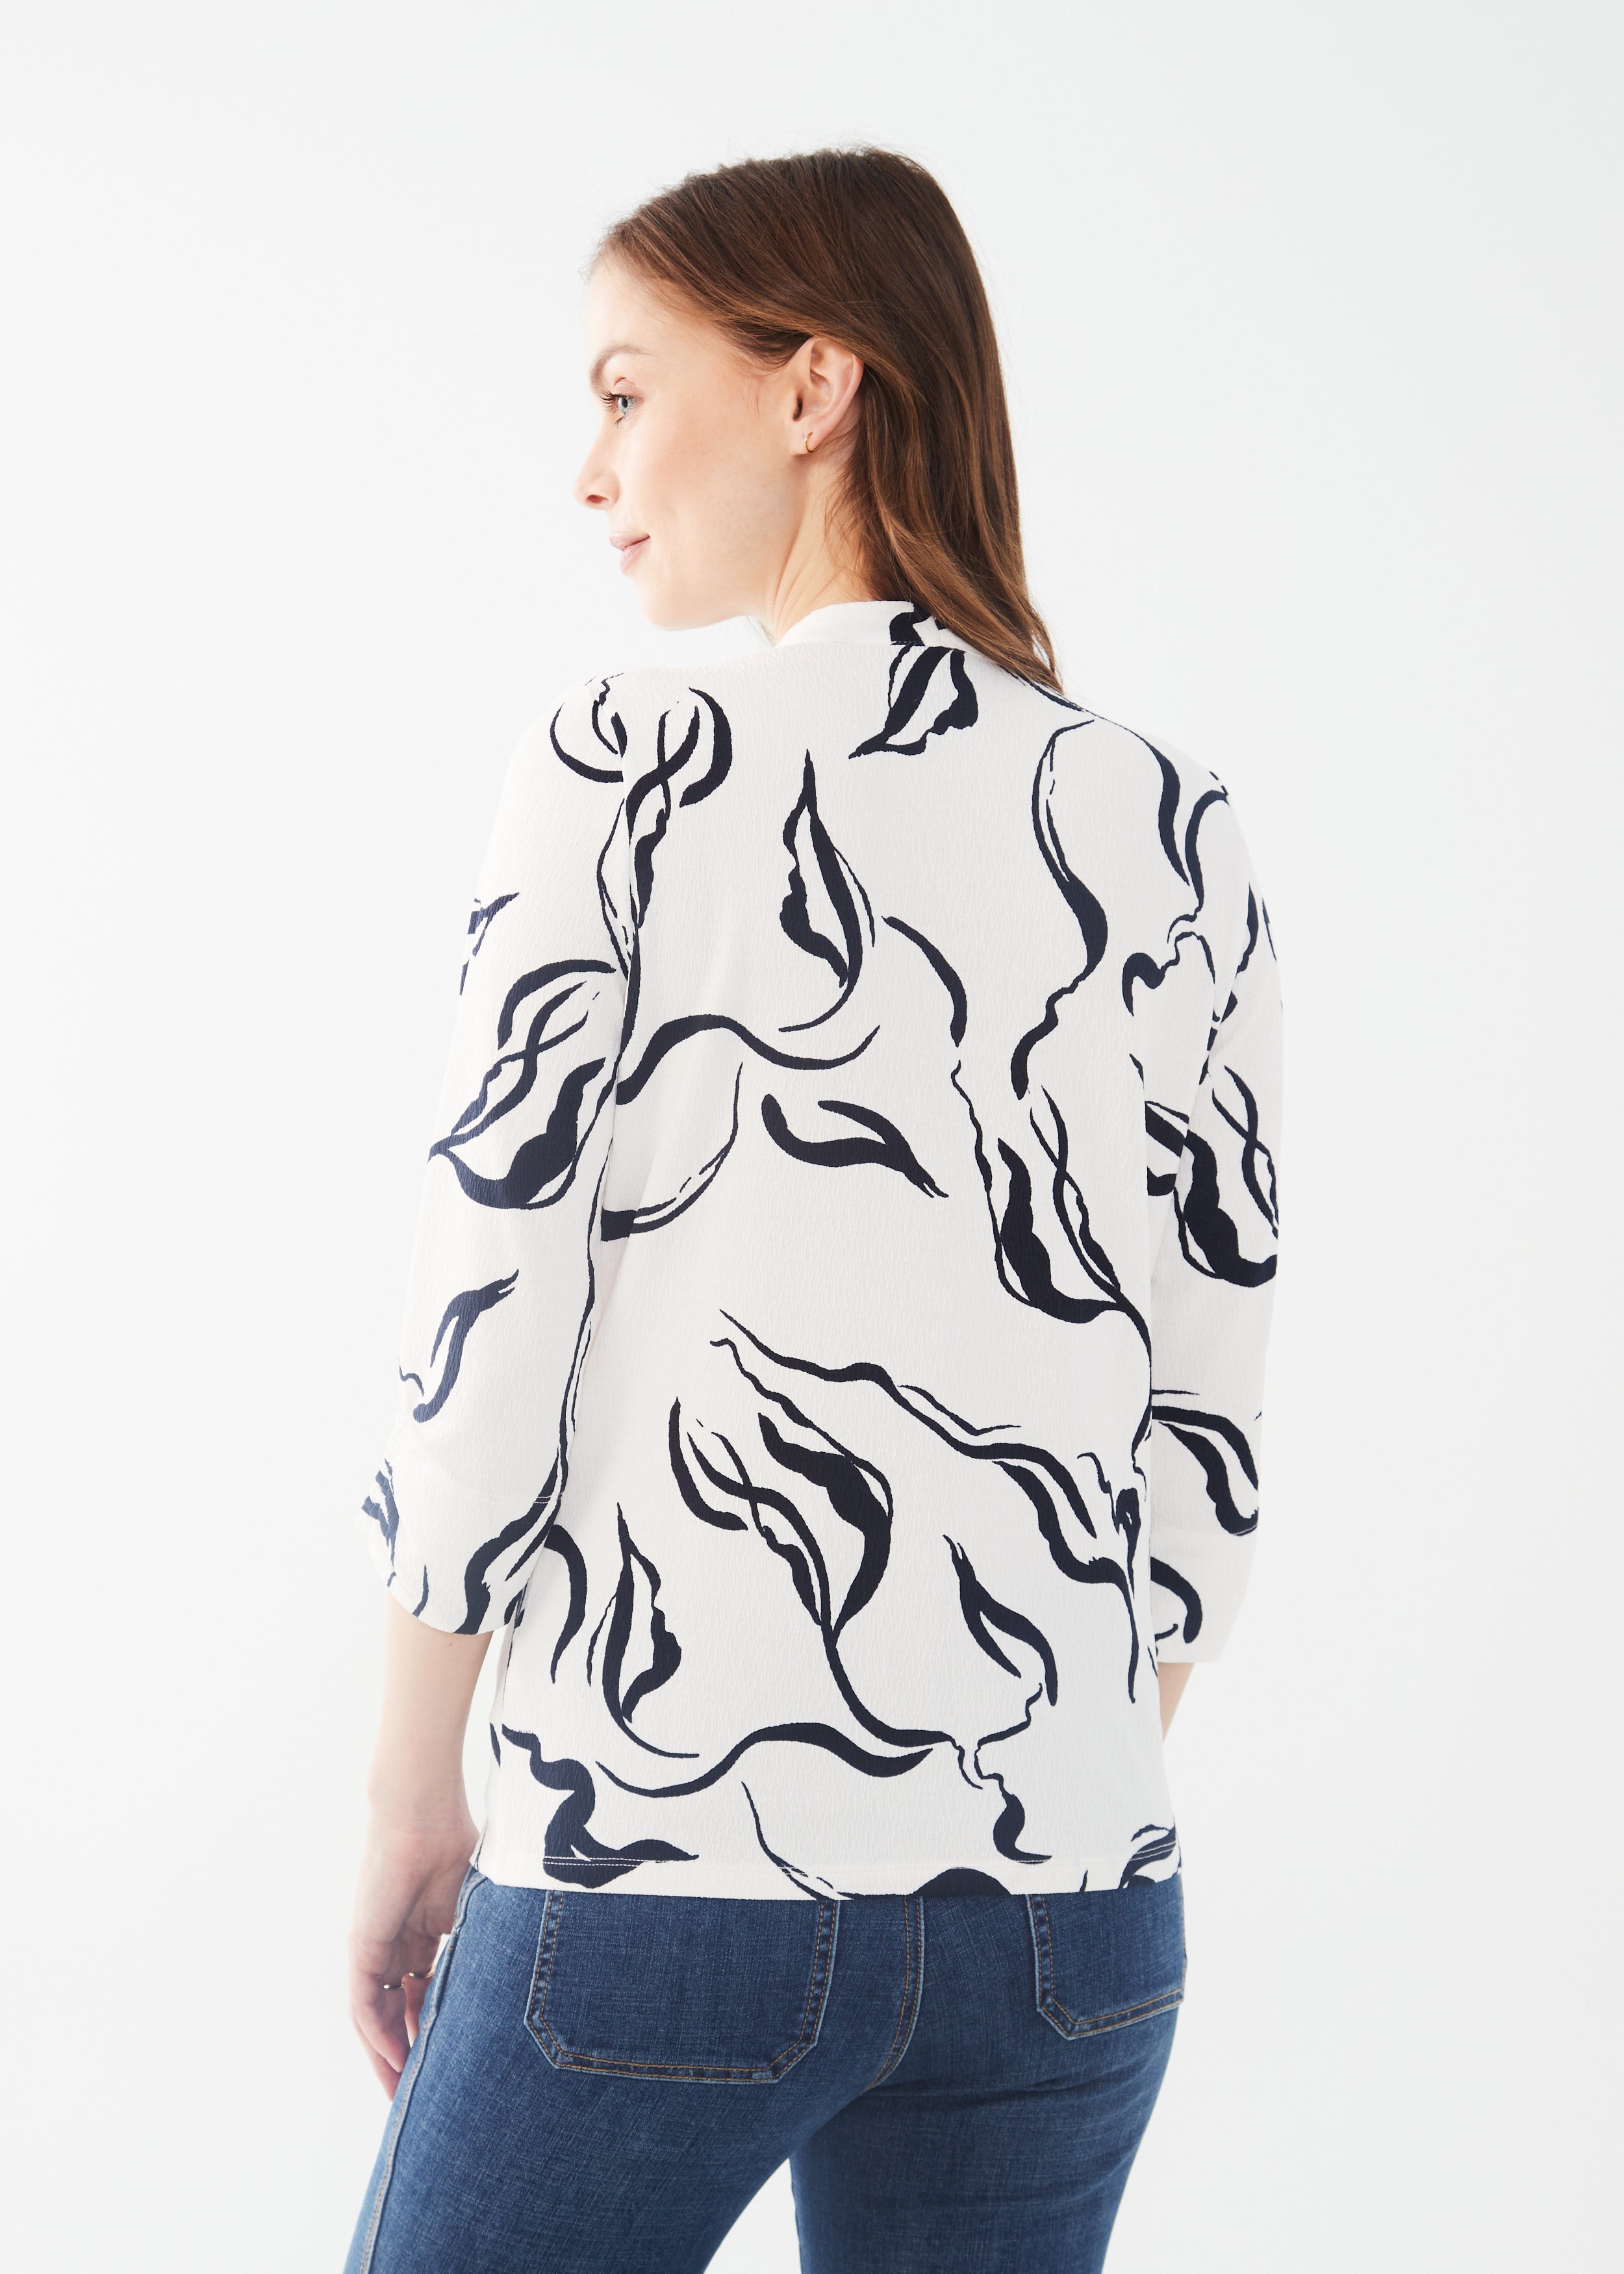 Elevate your wardrobe with the stunning FDJ Watercolour Overlay Top!